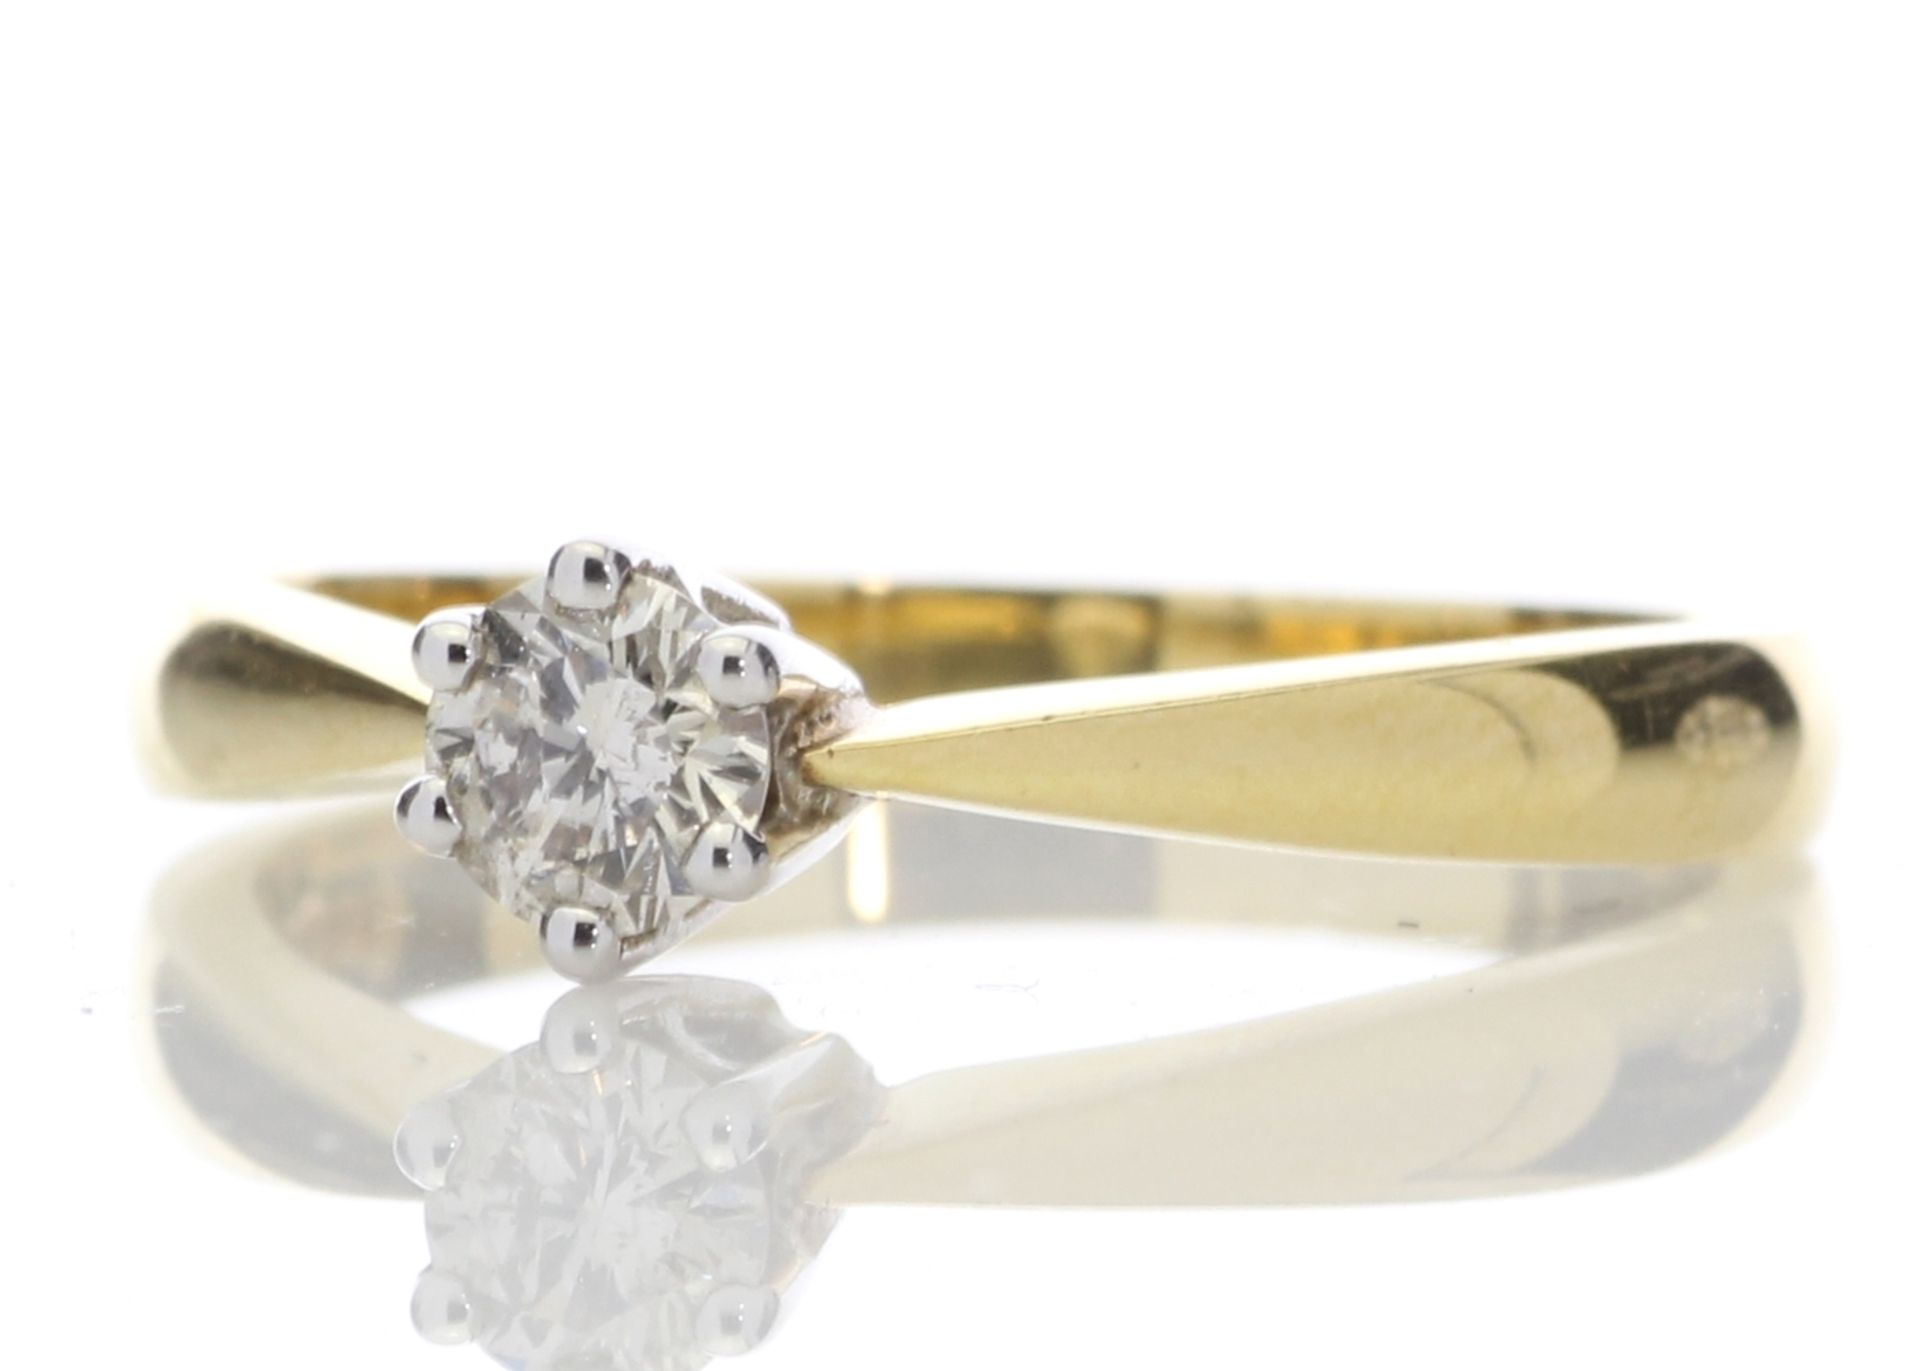 18ct Yellow Gold Single Stone Six Claw Set Diamond Ring 0.25 Carats - Valued By AGI £2,525.00 - This - Image 2 of 5